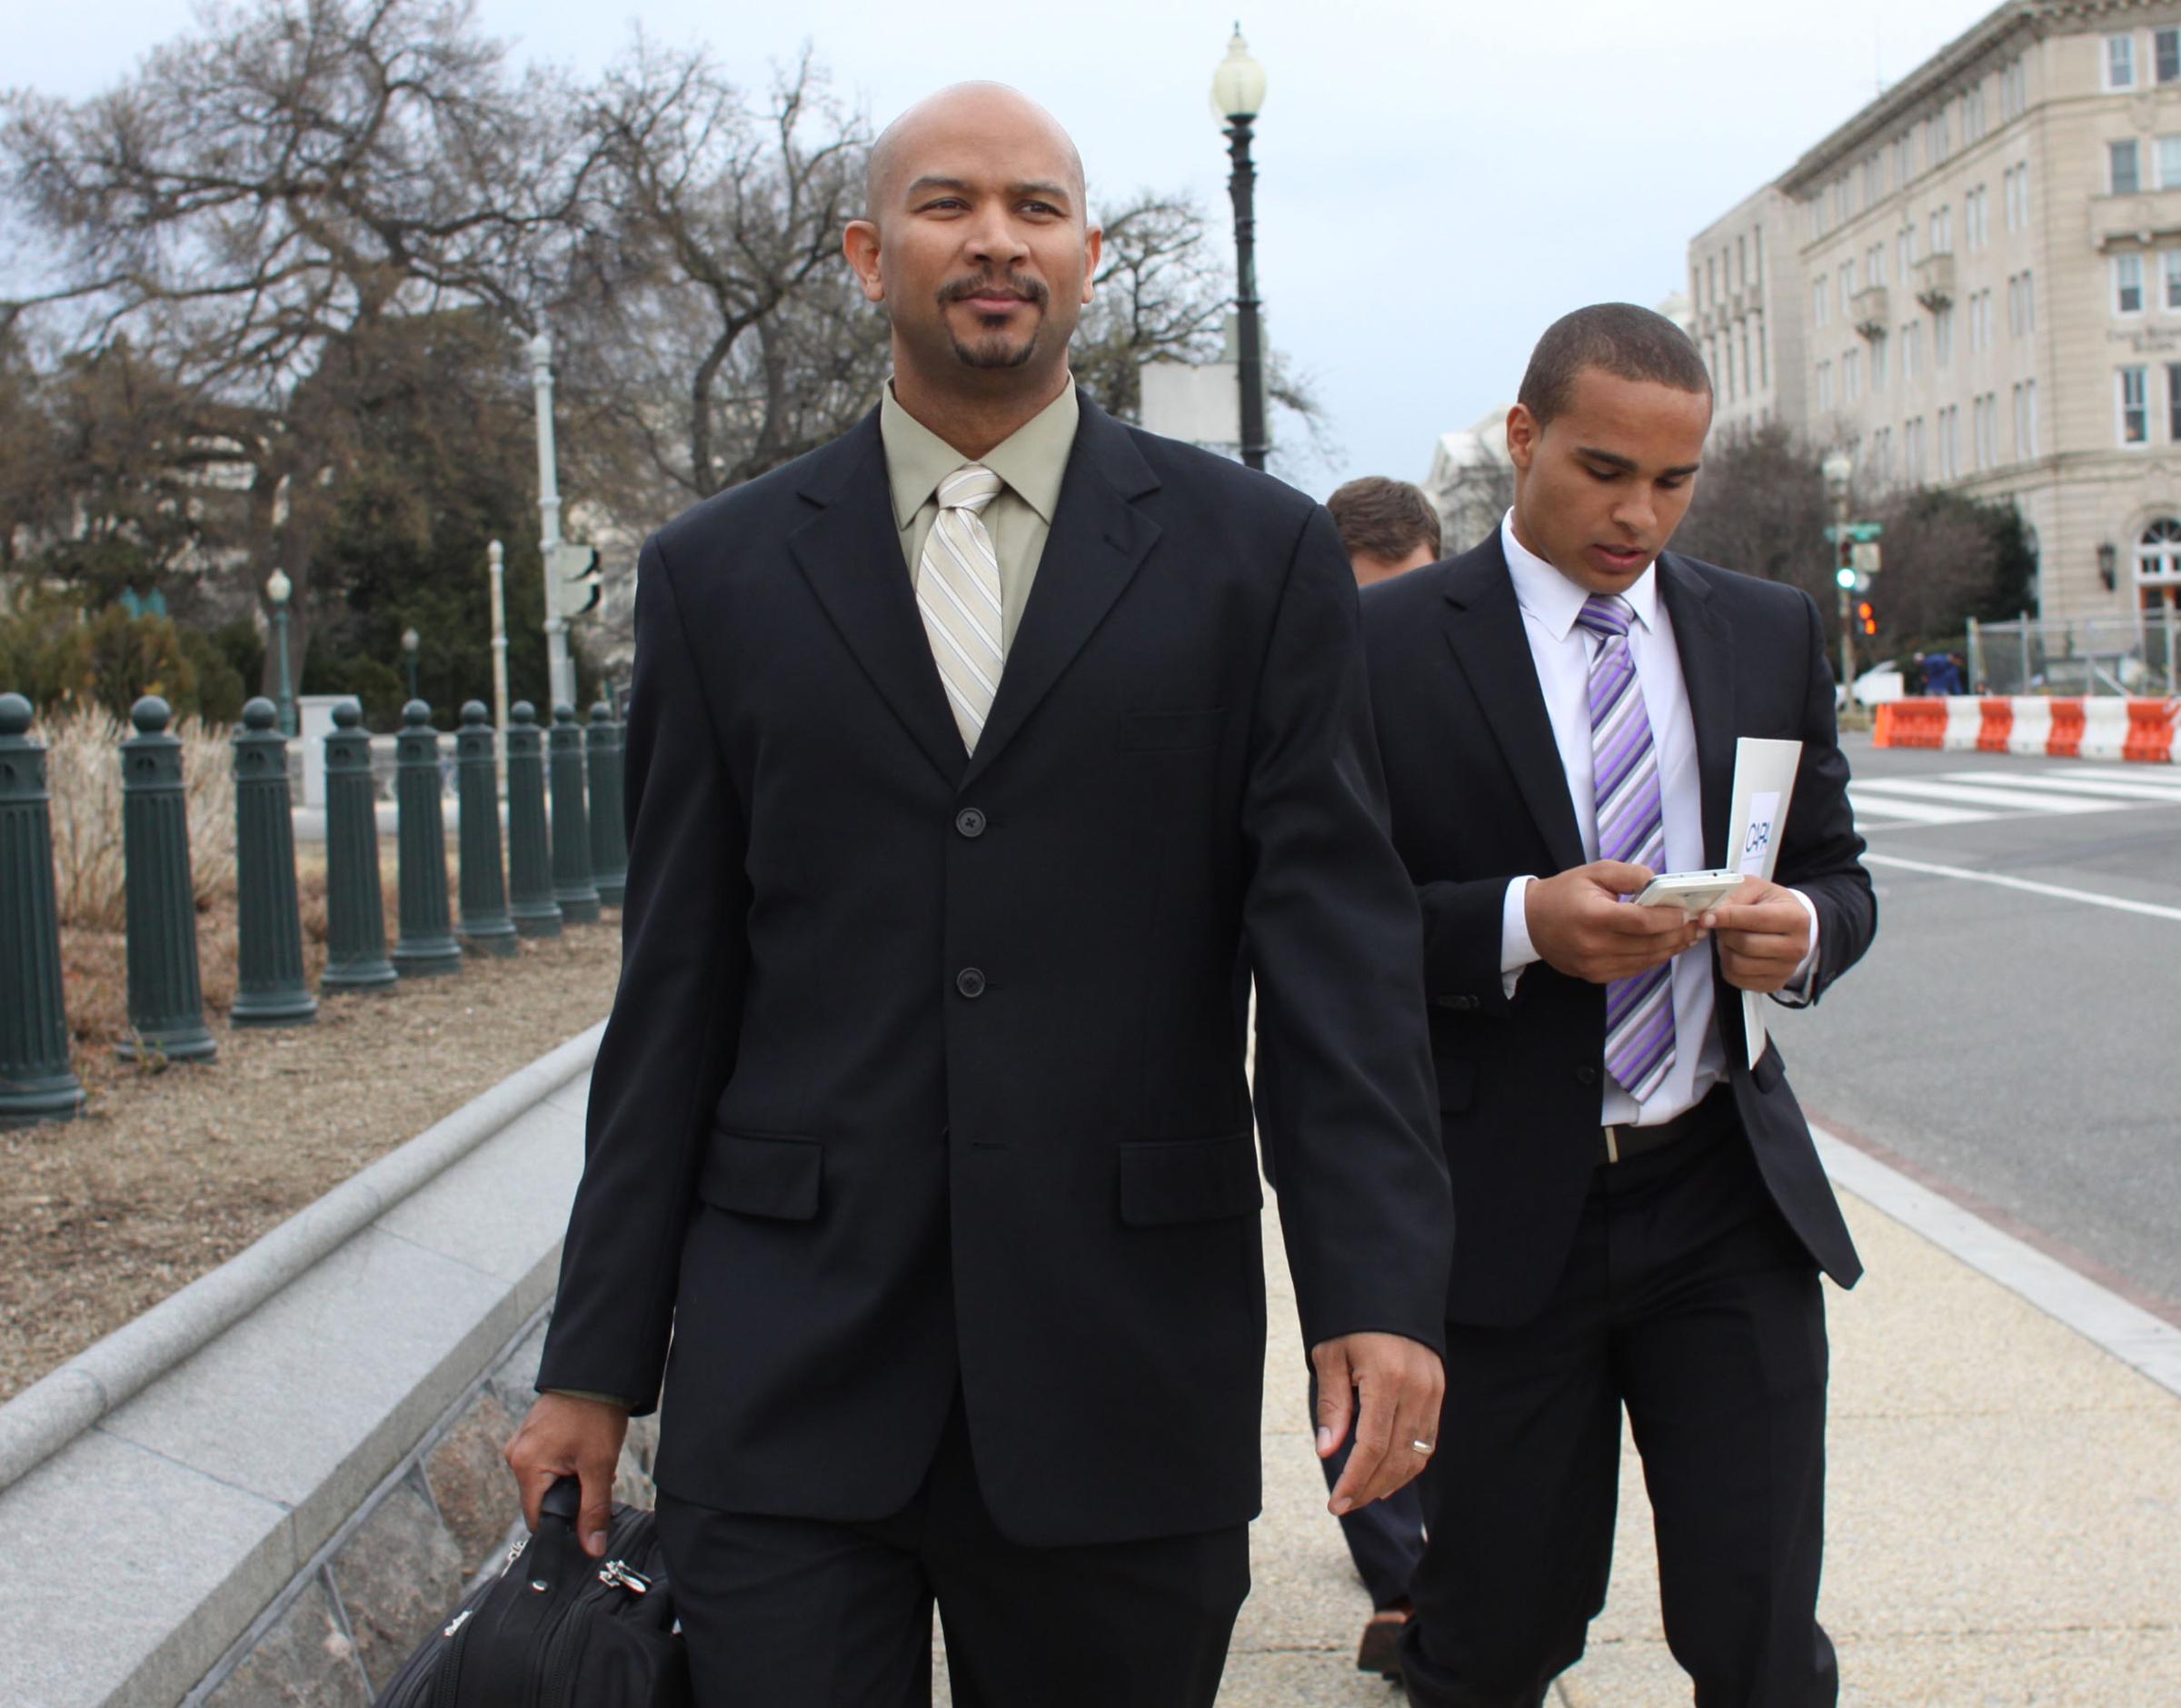 Ramogi Huma (left), founder and president of the National College Players Association, arrive on Capitol Hill in Washington on April 2, 2014.